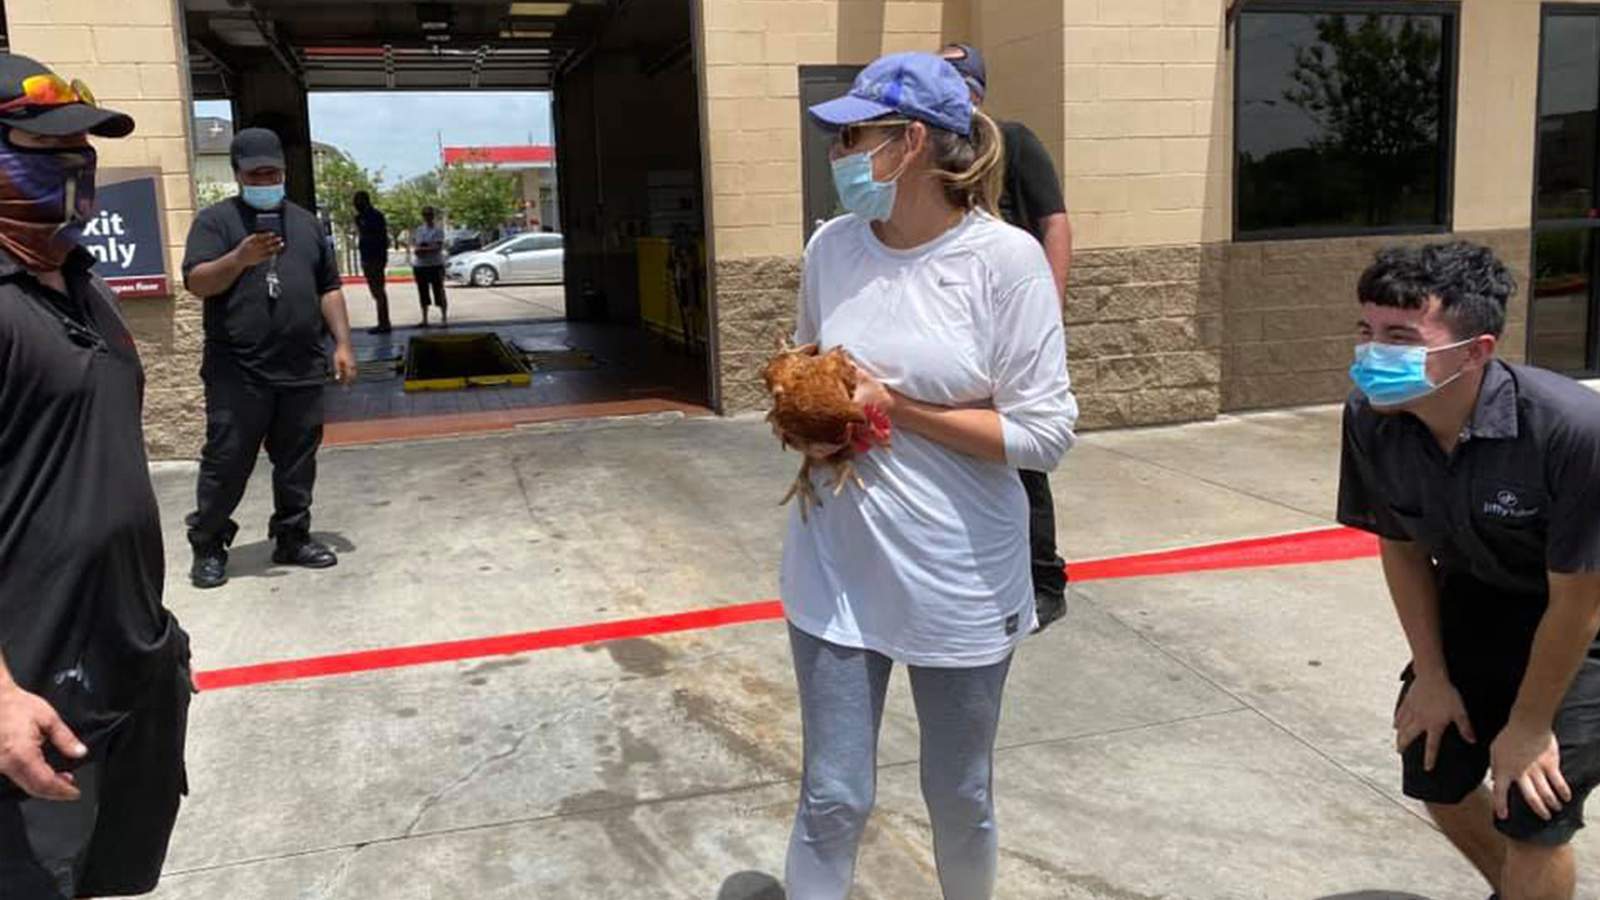 Maam, is this your chicken? Another Texas clucker flew the coop, this time to Jiffy Lube